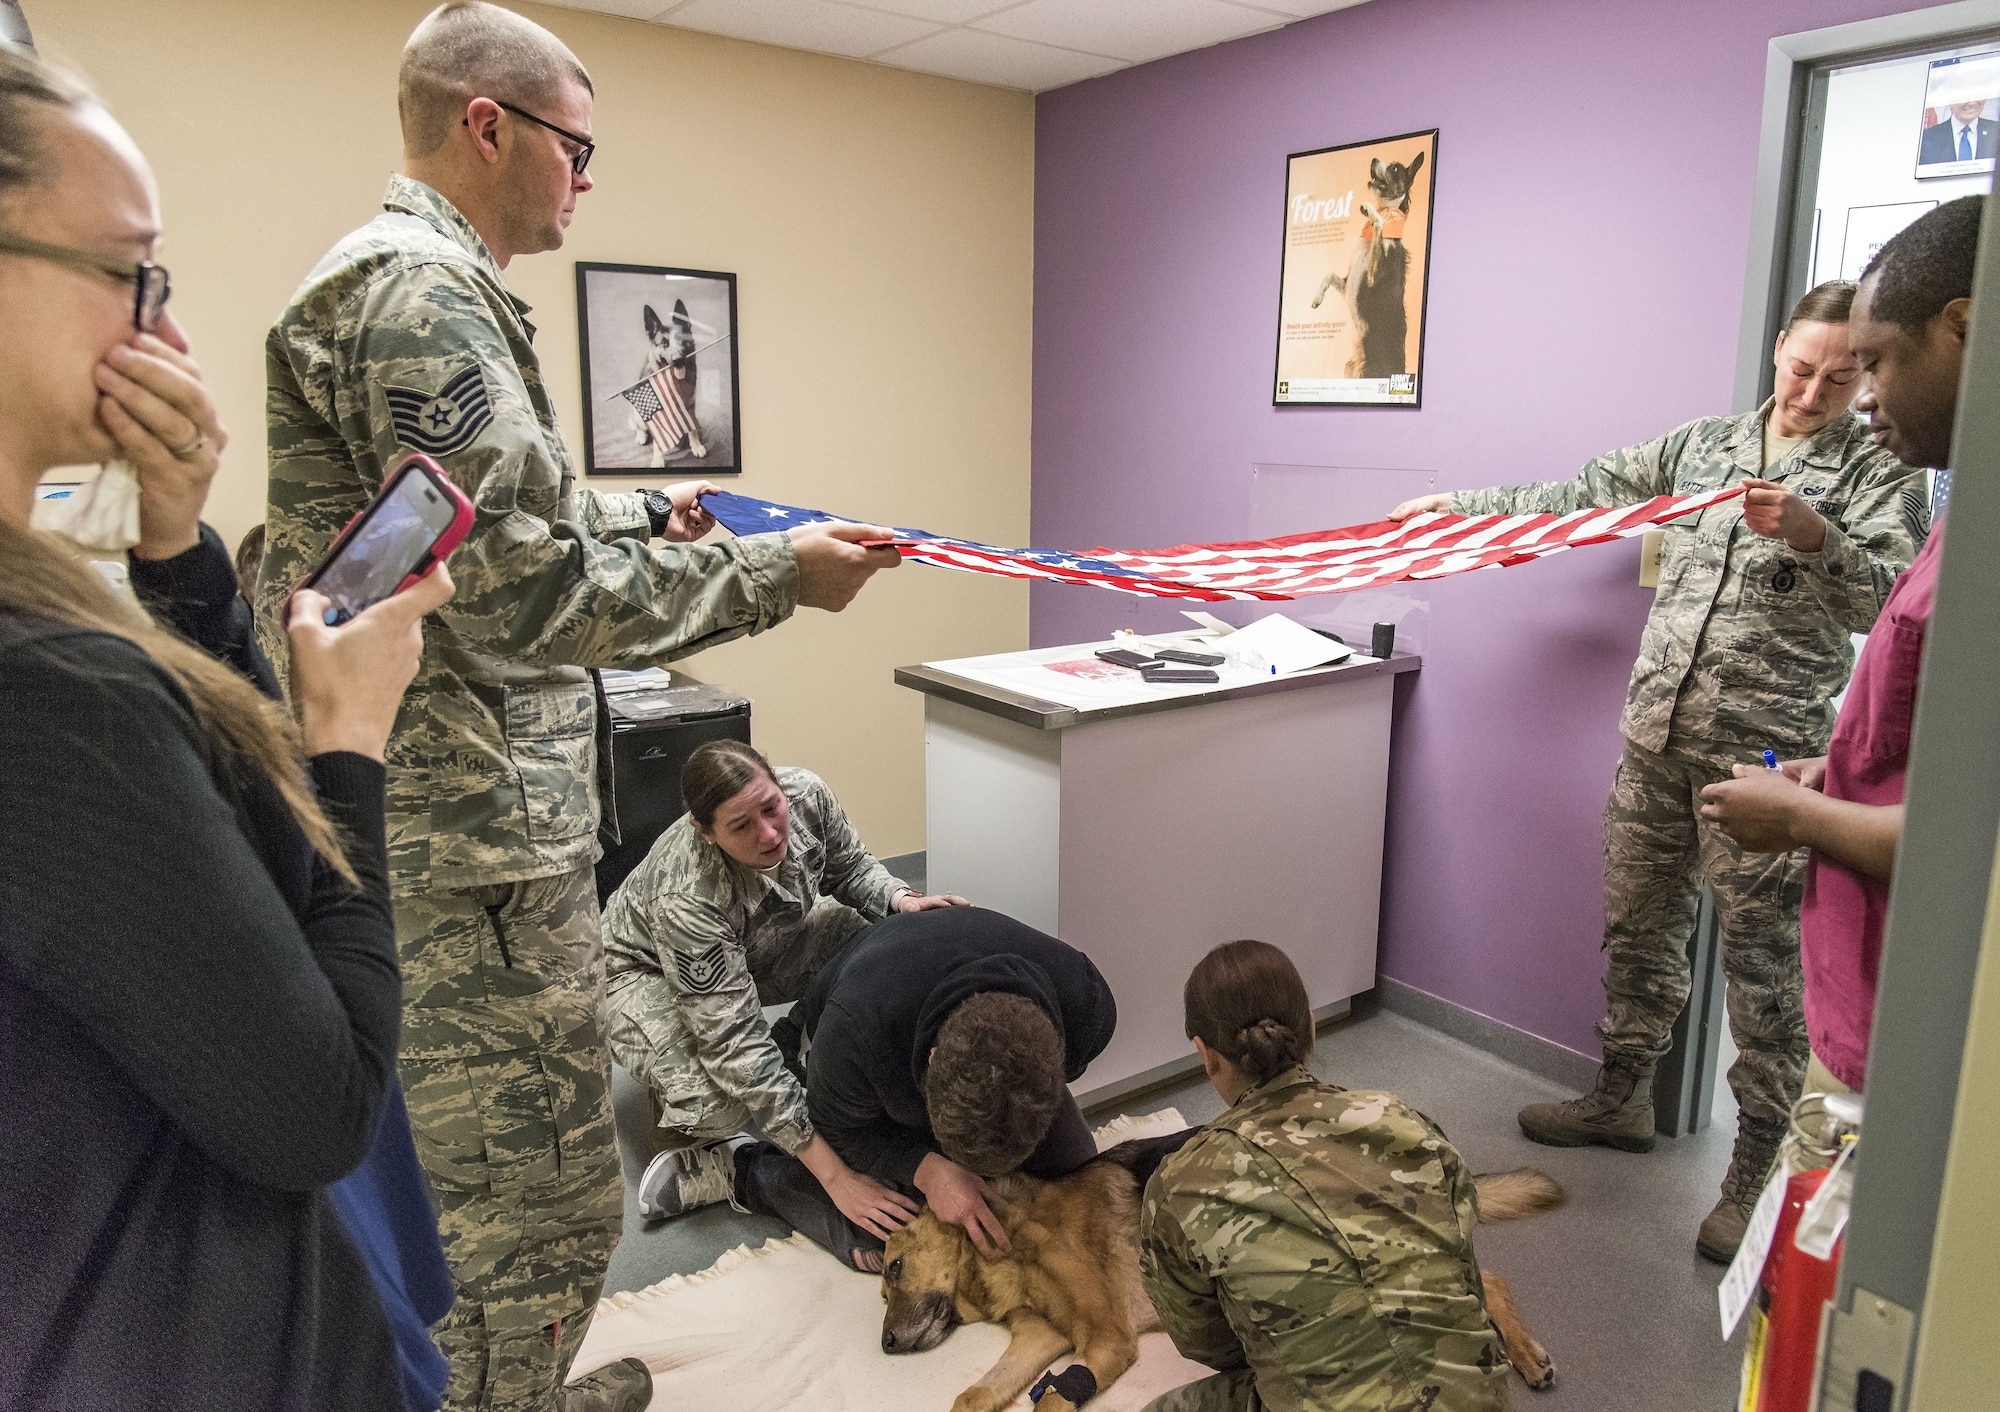 Tech. Sgt. Matthew Salter, 436th Security Forces Squadron military working dog kennel master, and Staff Sgt. Ashley Beattie, 436th SFS unit deployment manager, hold the U.S. flag over retired Military Working Dog Rico Jan. 24, 2018, at the Veterinary Treatment Facility on Dover Air Force Base, Del. MWD Rico was humanely euthanized by a U.S. Army veterinarian due to his declining health caused by Canine Degenerative Myelopathy. (U.S. Air Force photo by Roland Balik)